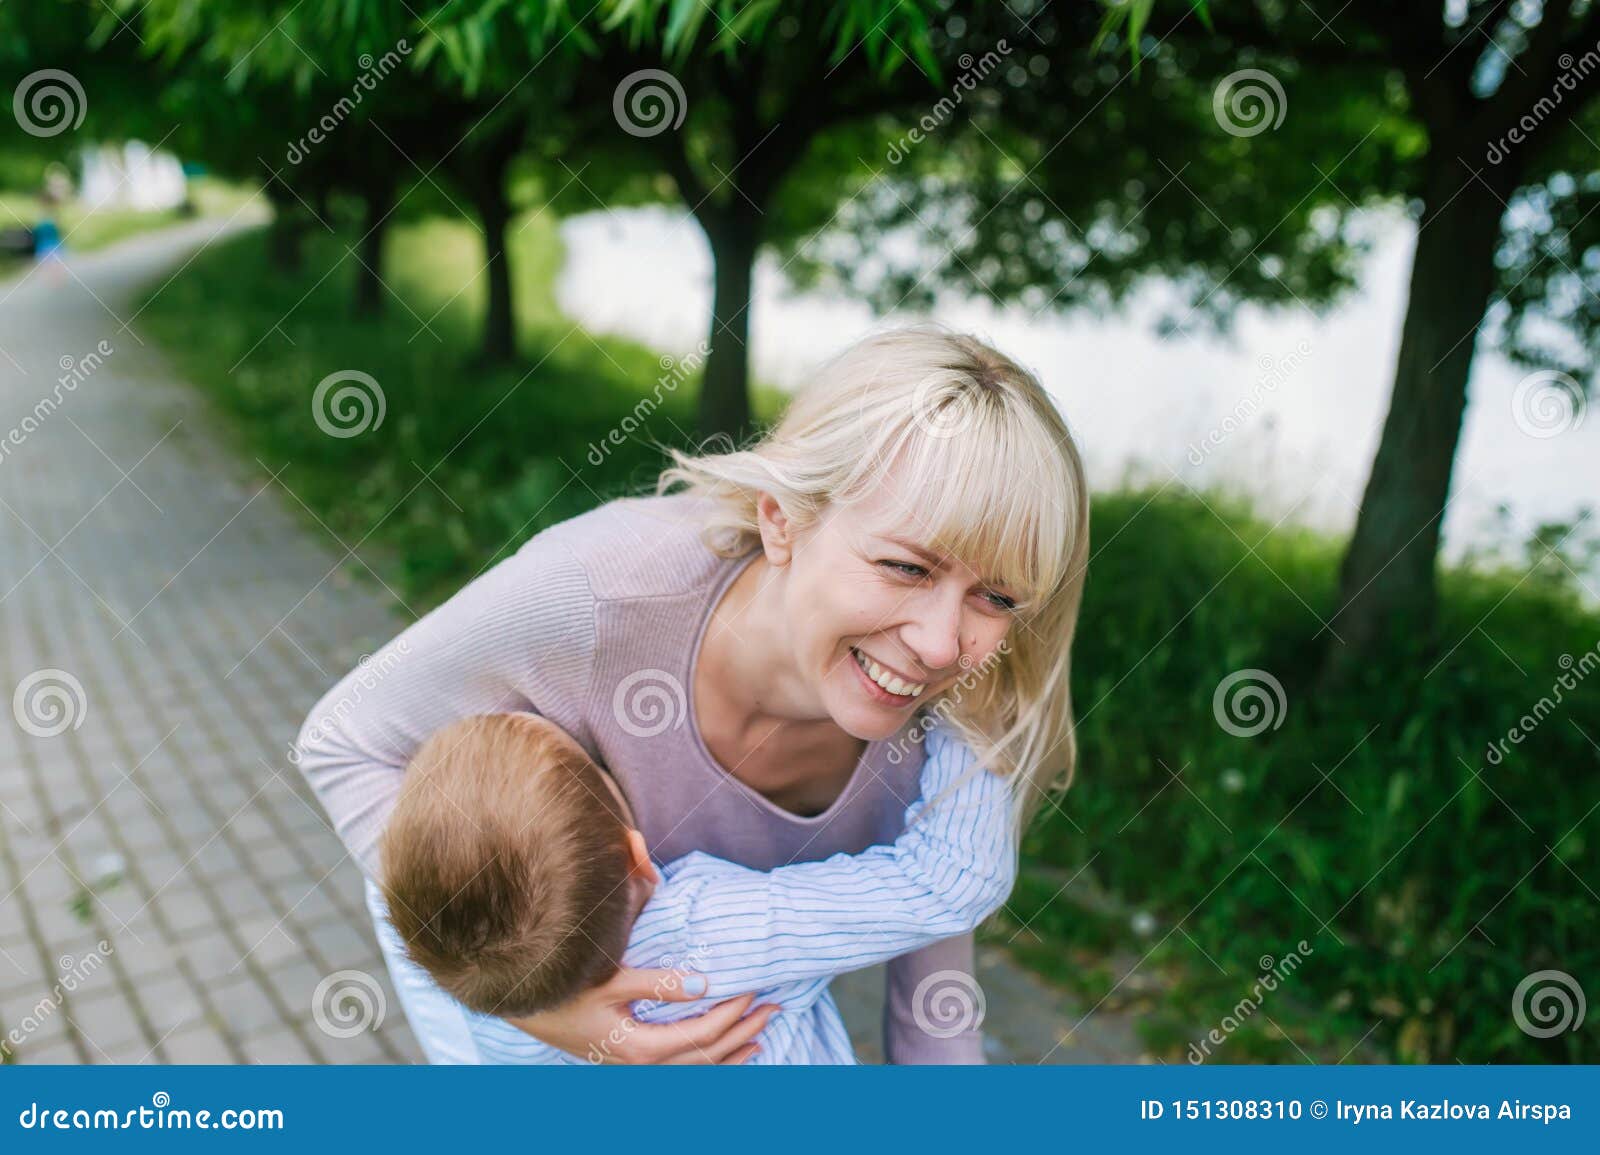 Cute cheerful child with mother play outdoors in park. Closeup photo